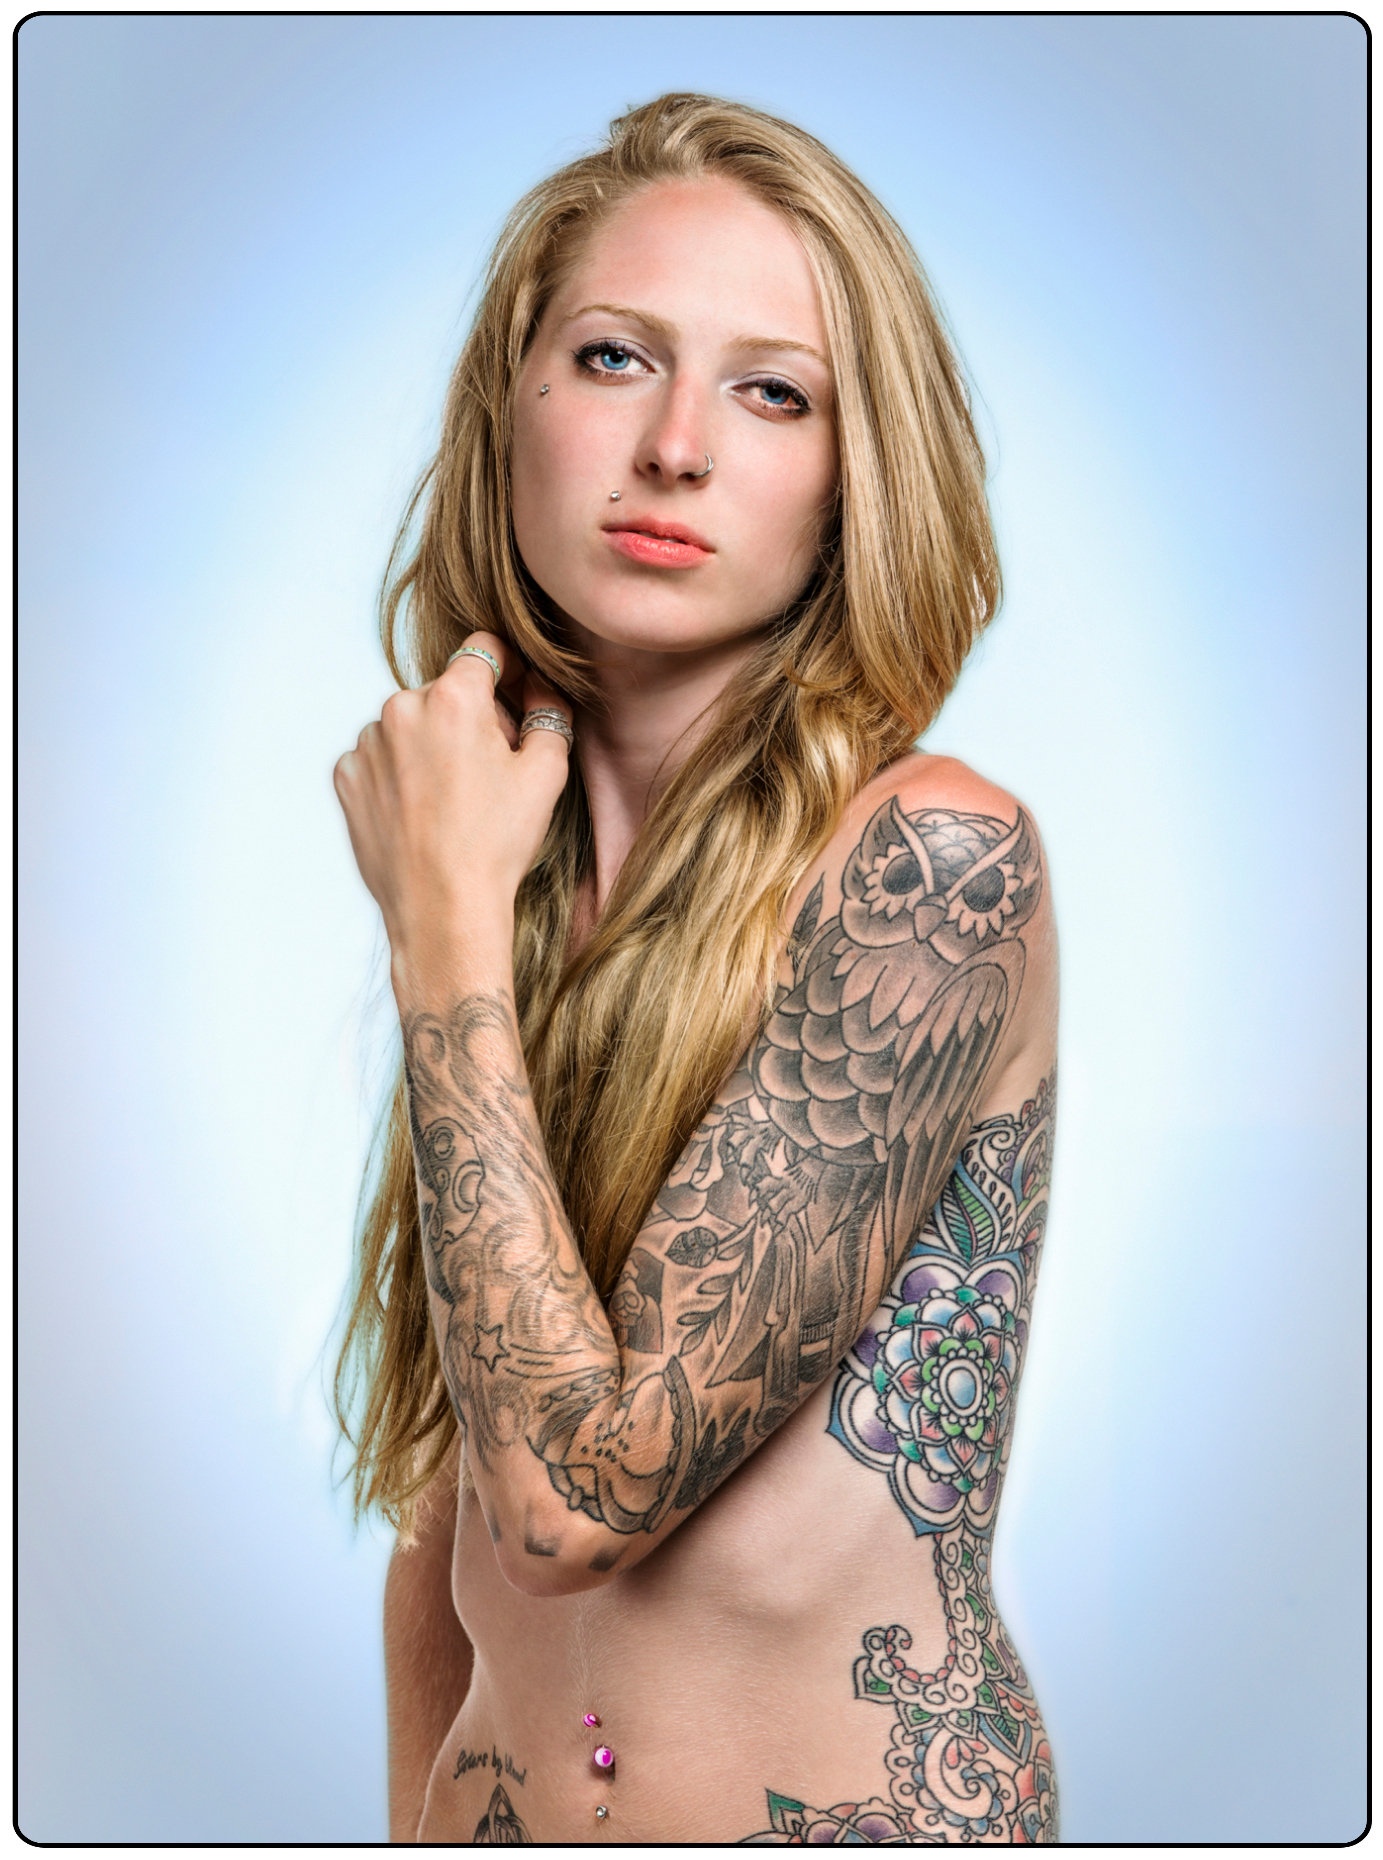 Studio portrait of tattoos & body piercings on an attractive nude blonde haired young woman